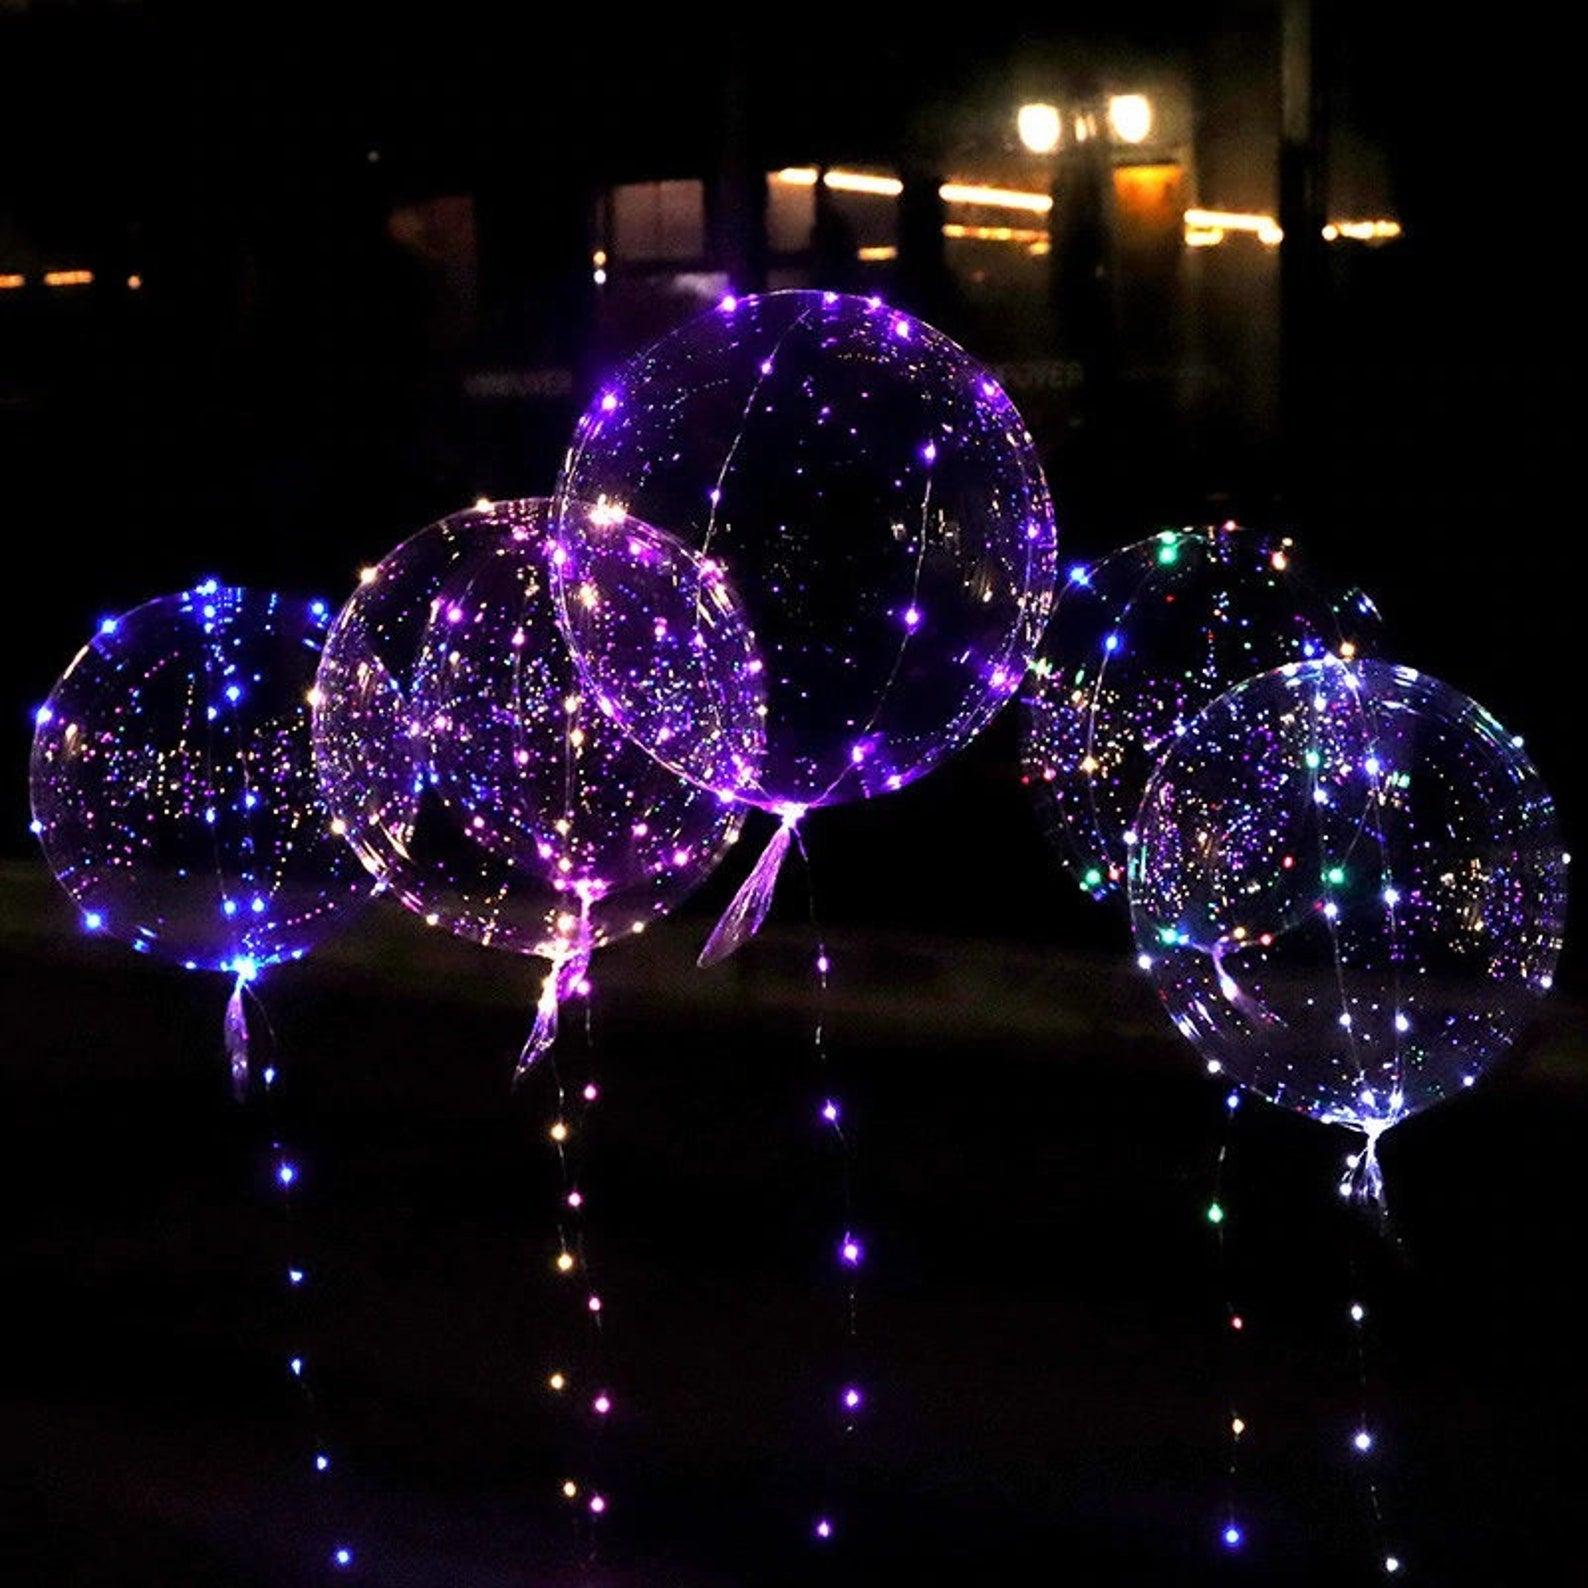 Blue and Purple Led Bobo Balloons for Theme Party Decorations - If you say i do